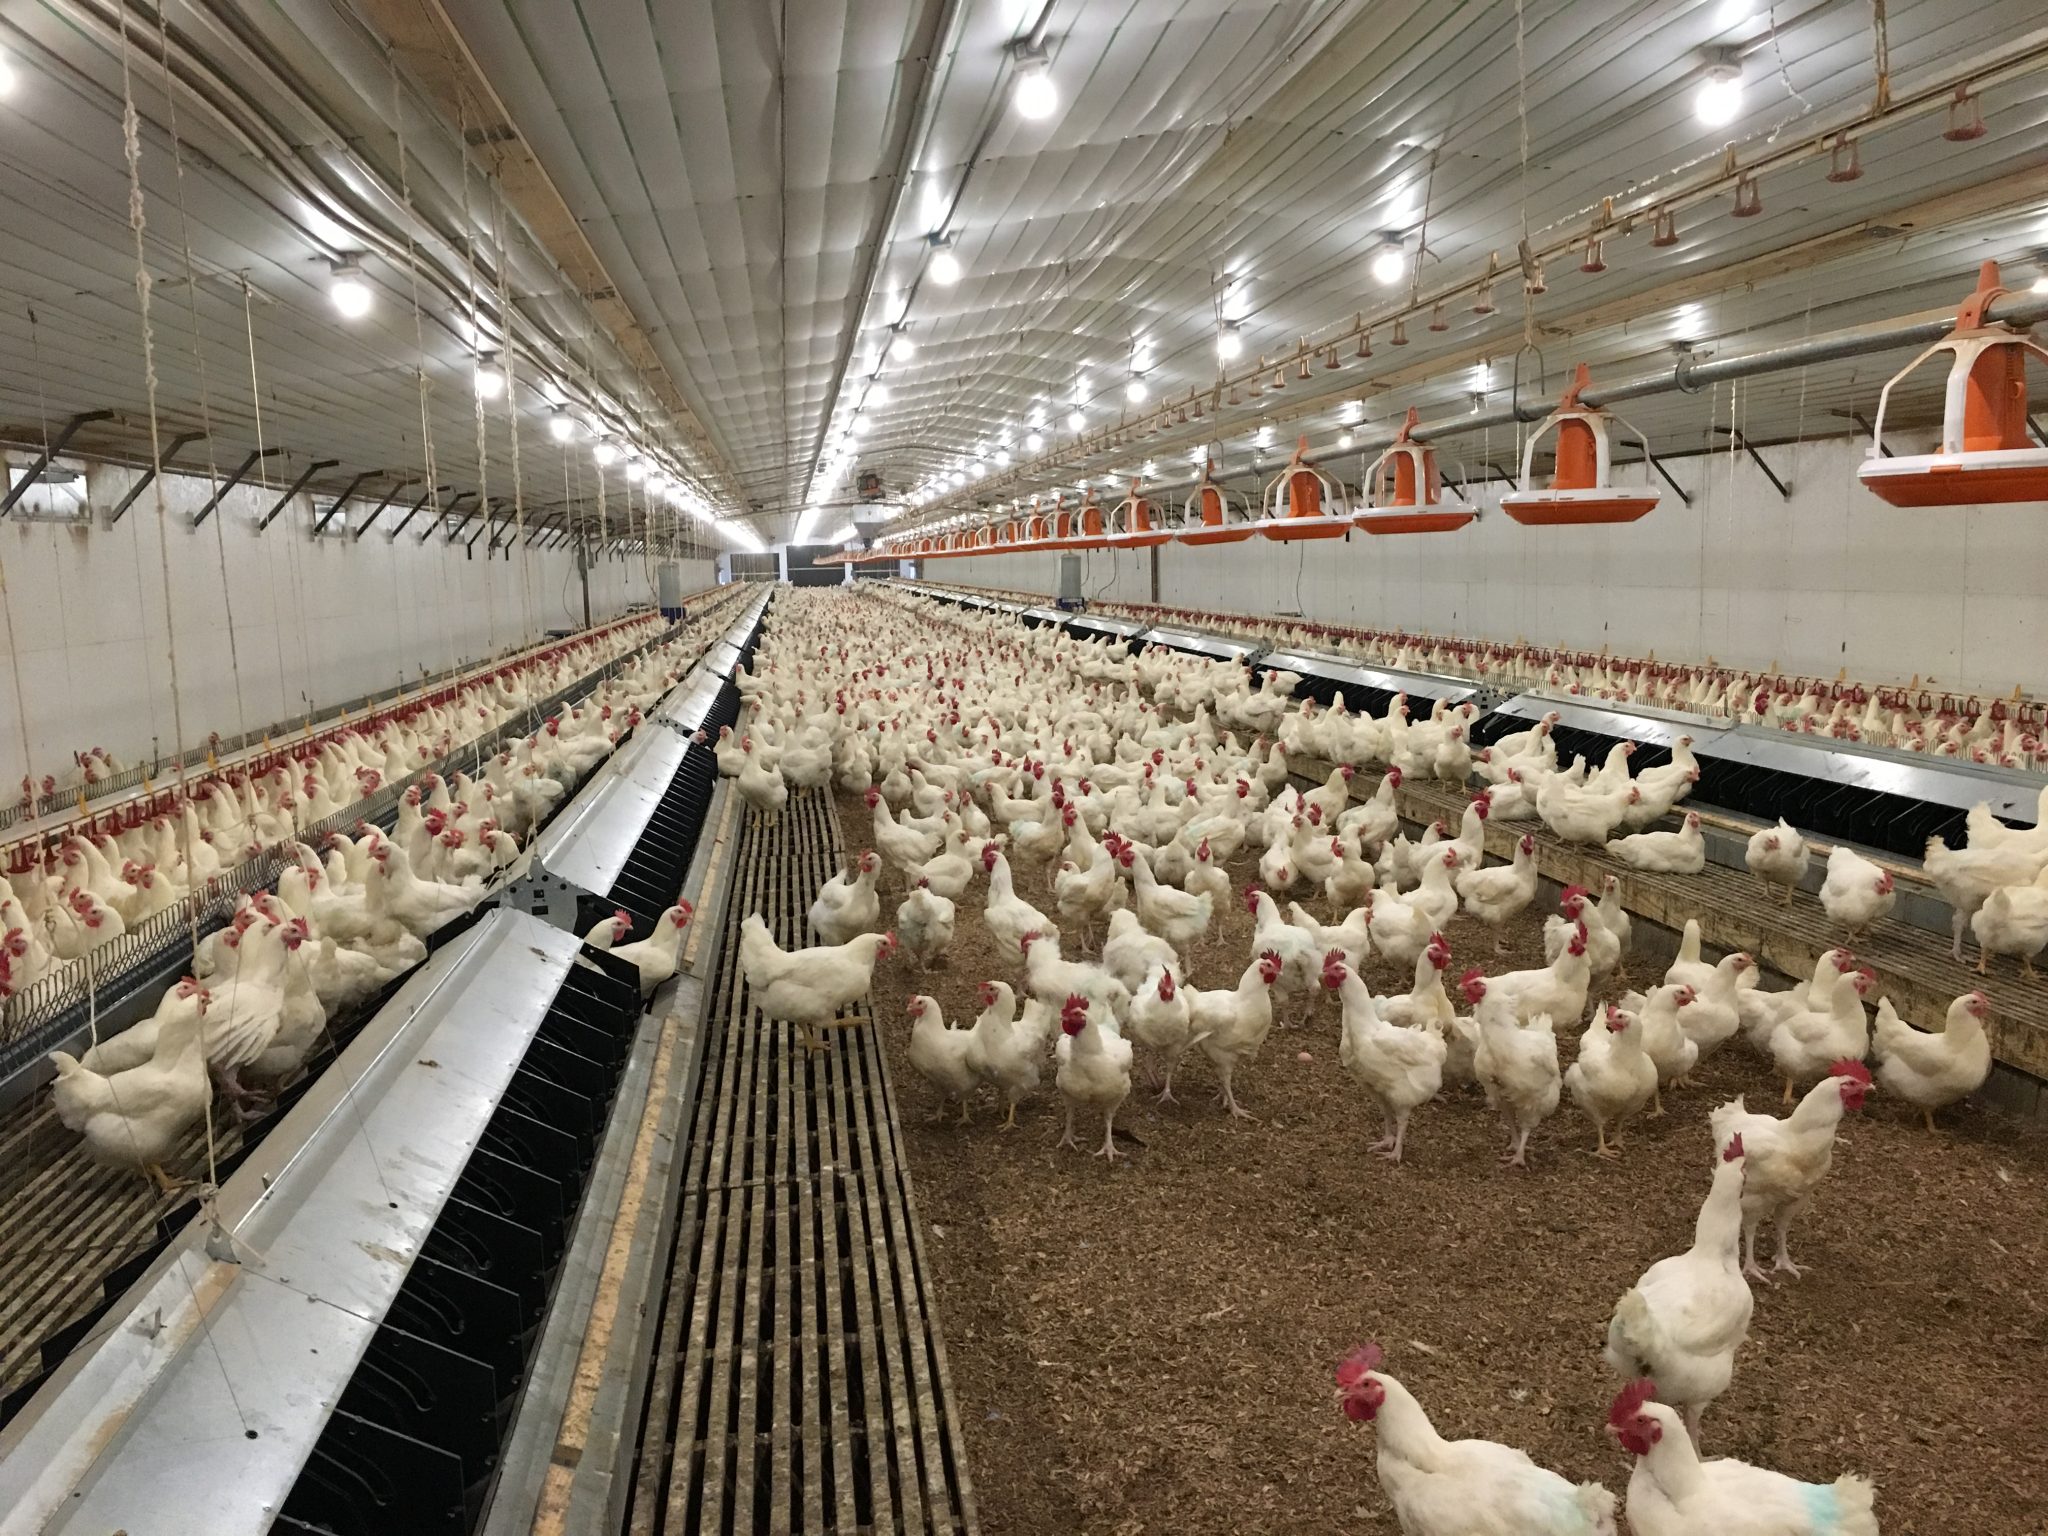 IV. Guidelines for Calculating Space Requirements for Hens